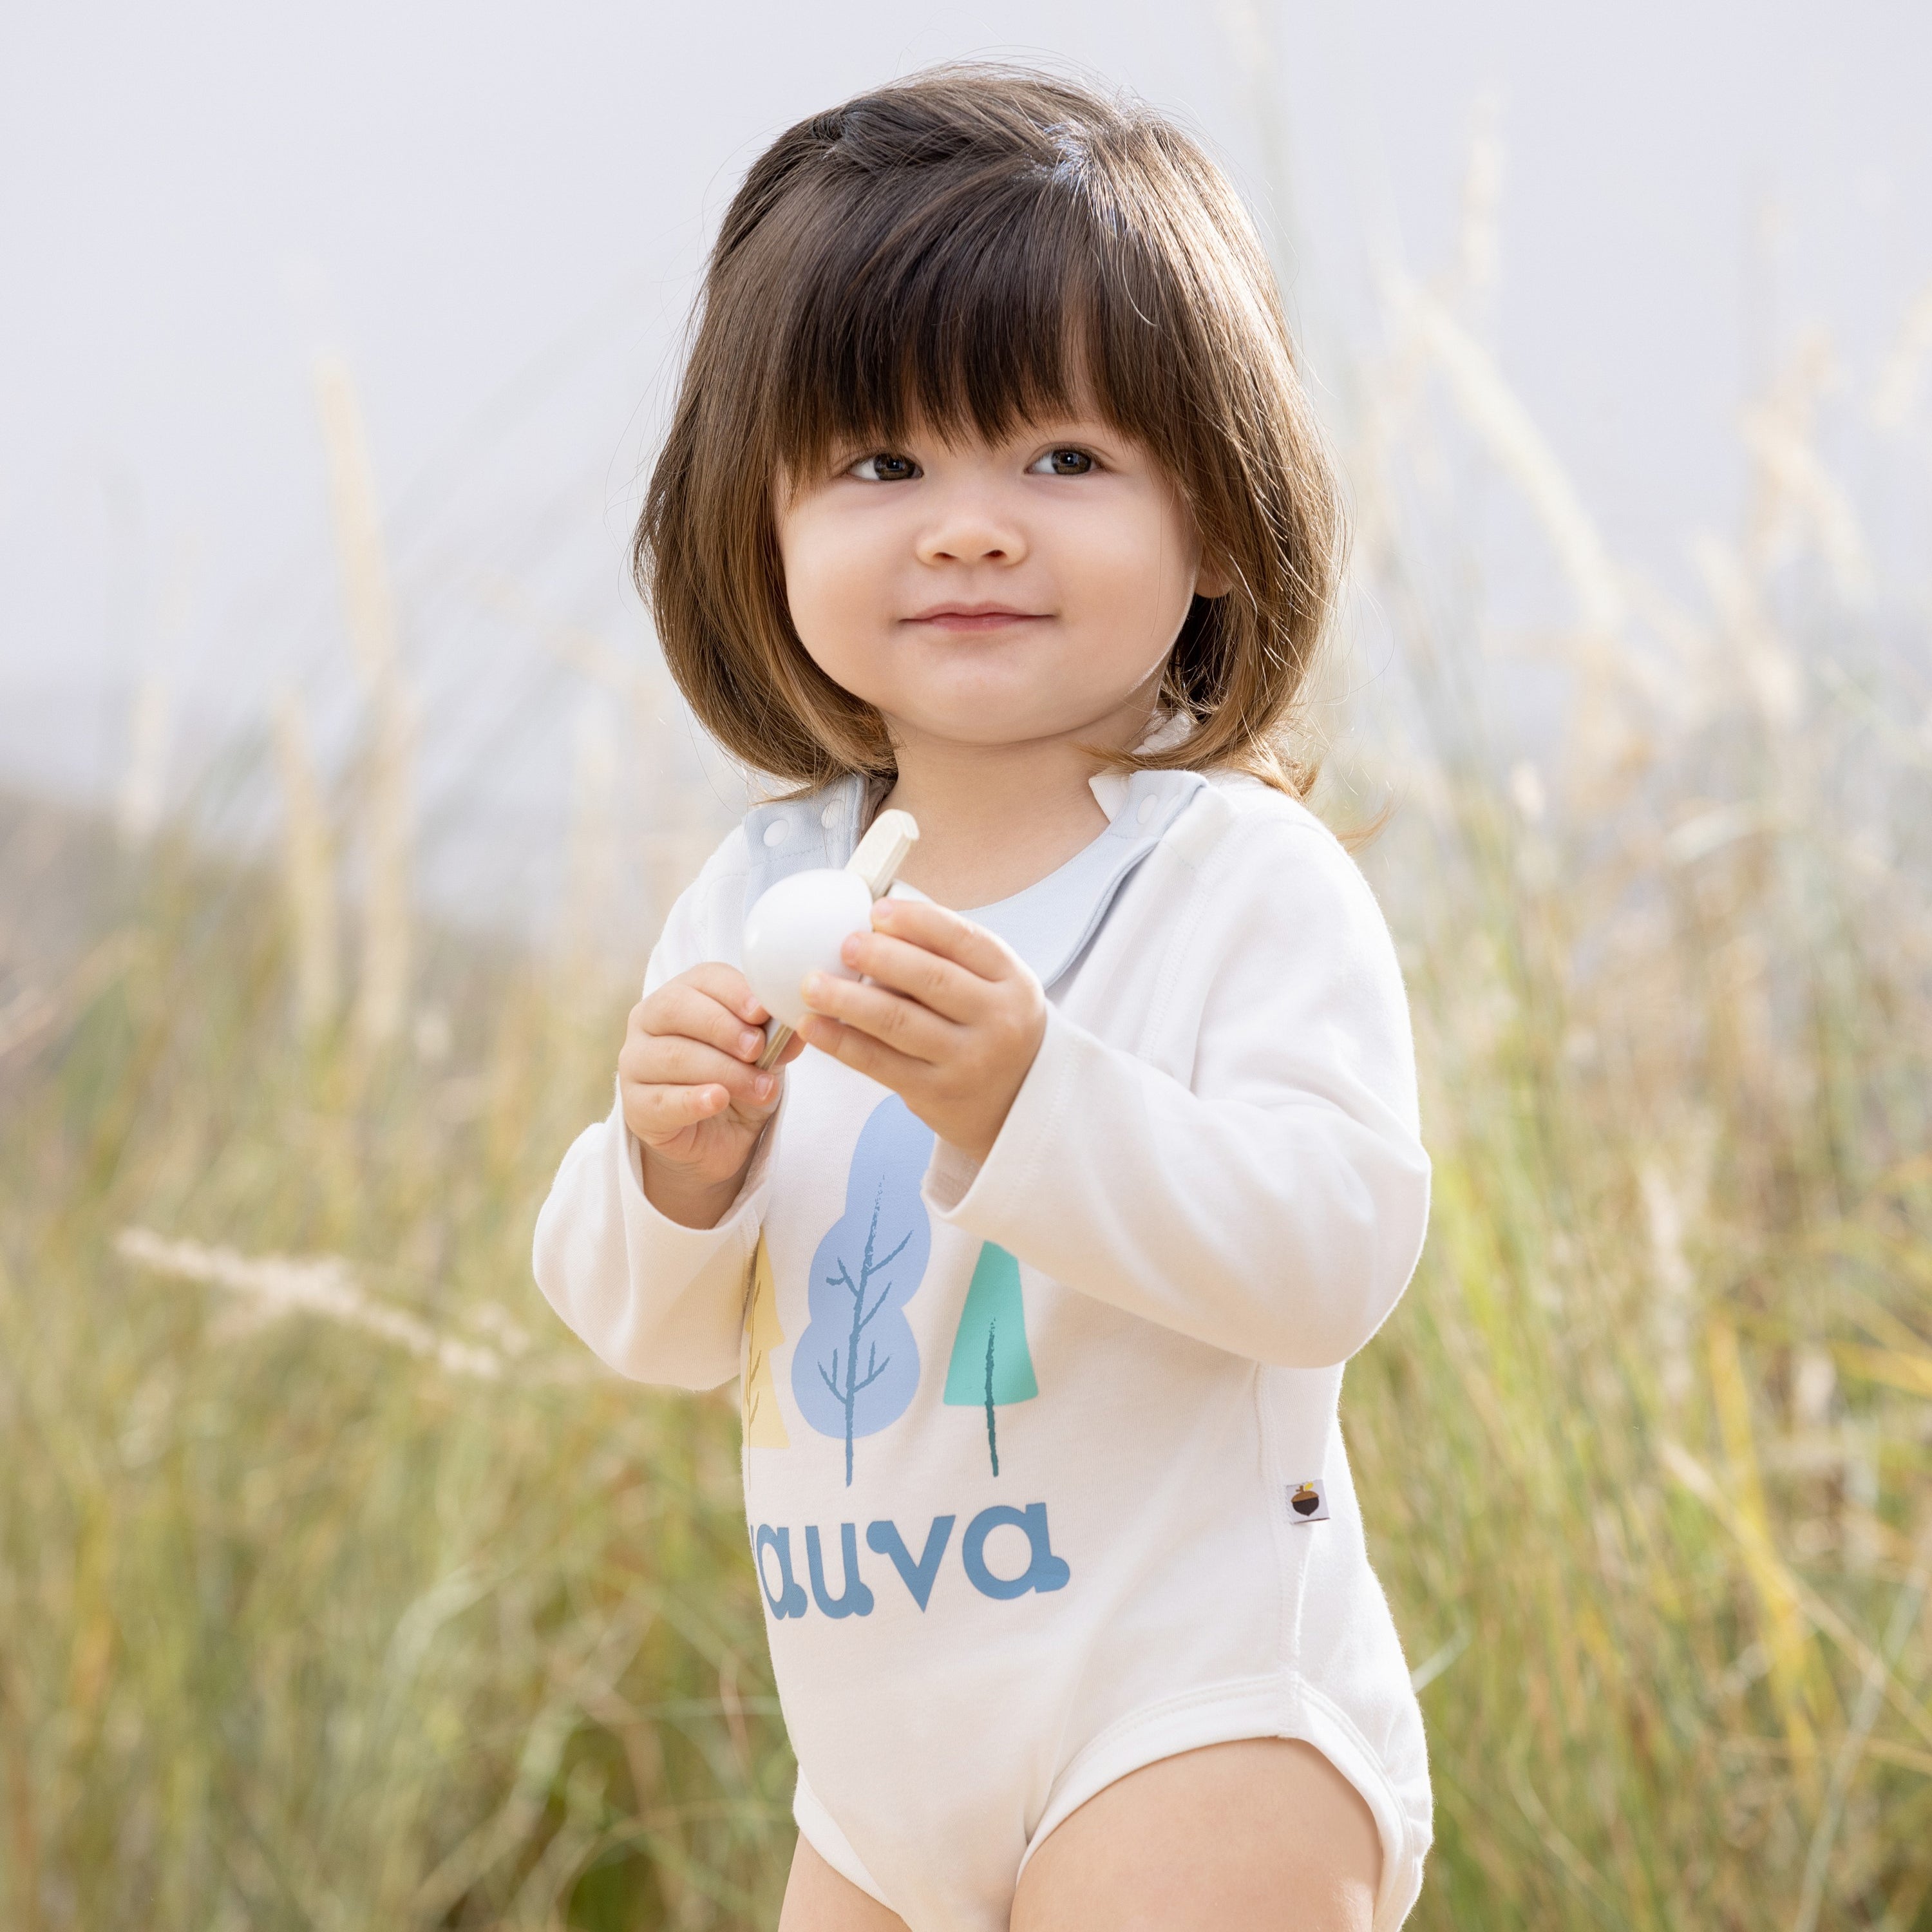 Important Factors to Consider in Buying Baby Clothes